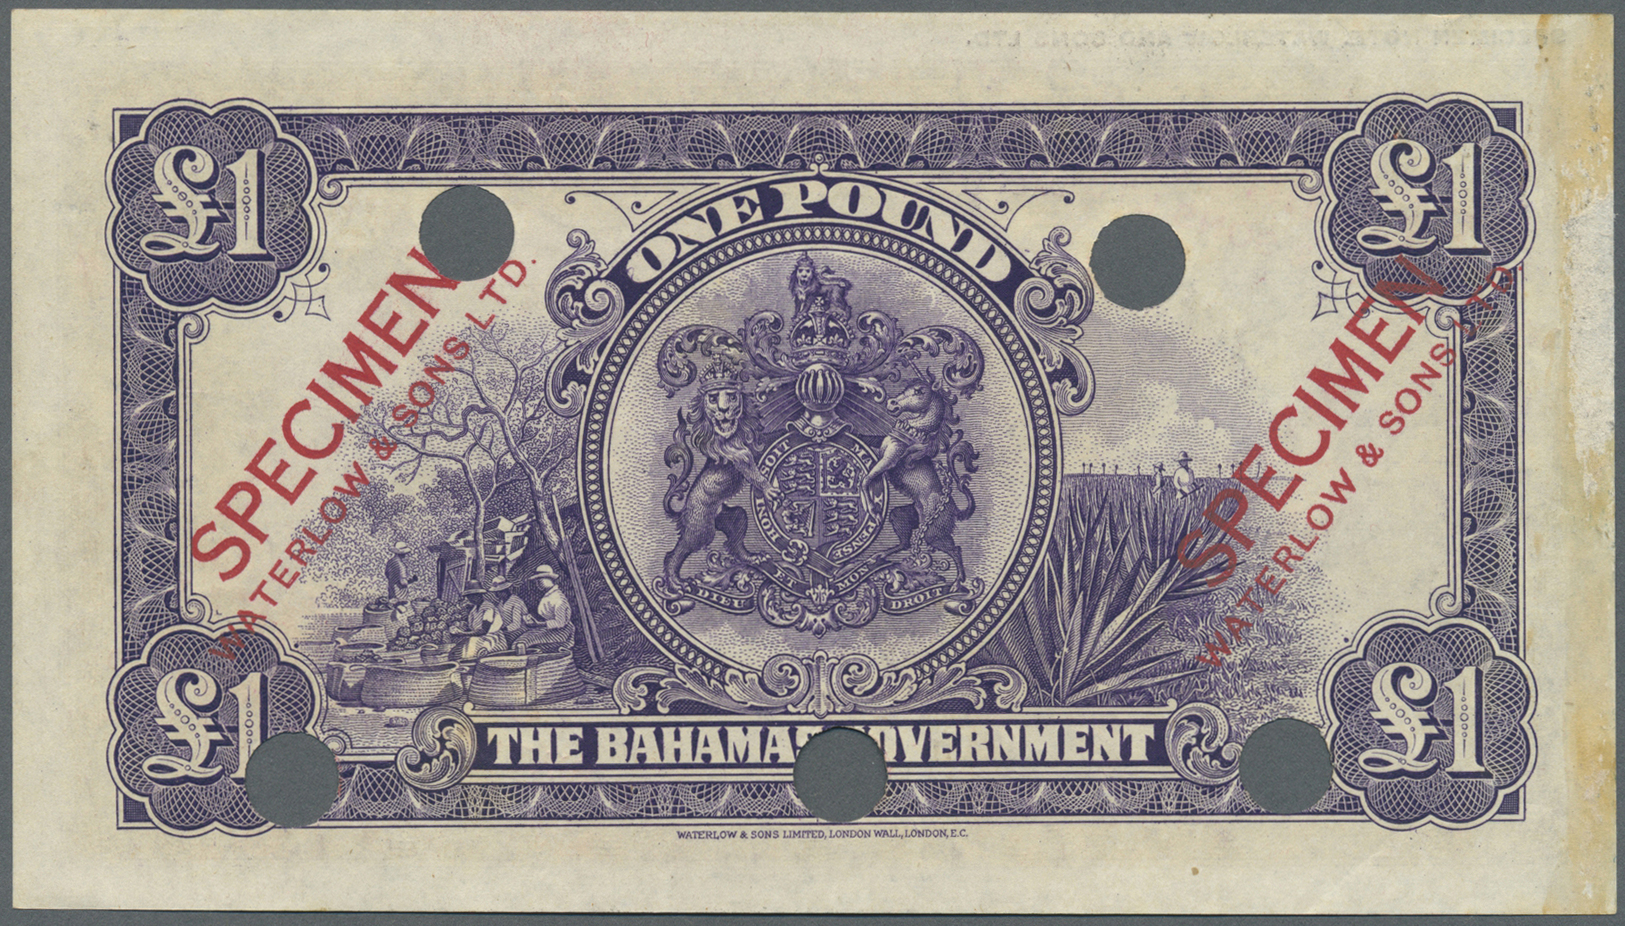 00214 Bahamas: 1 Pound L.1919 Color Trial Specimen By Waterlow & Sons Ltd. In Lilac Color, P.7cts, Punch Hole Cancellati - Bahamas